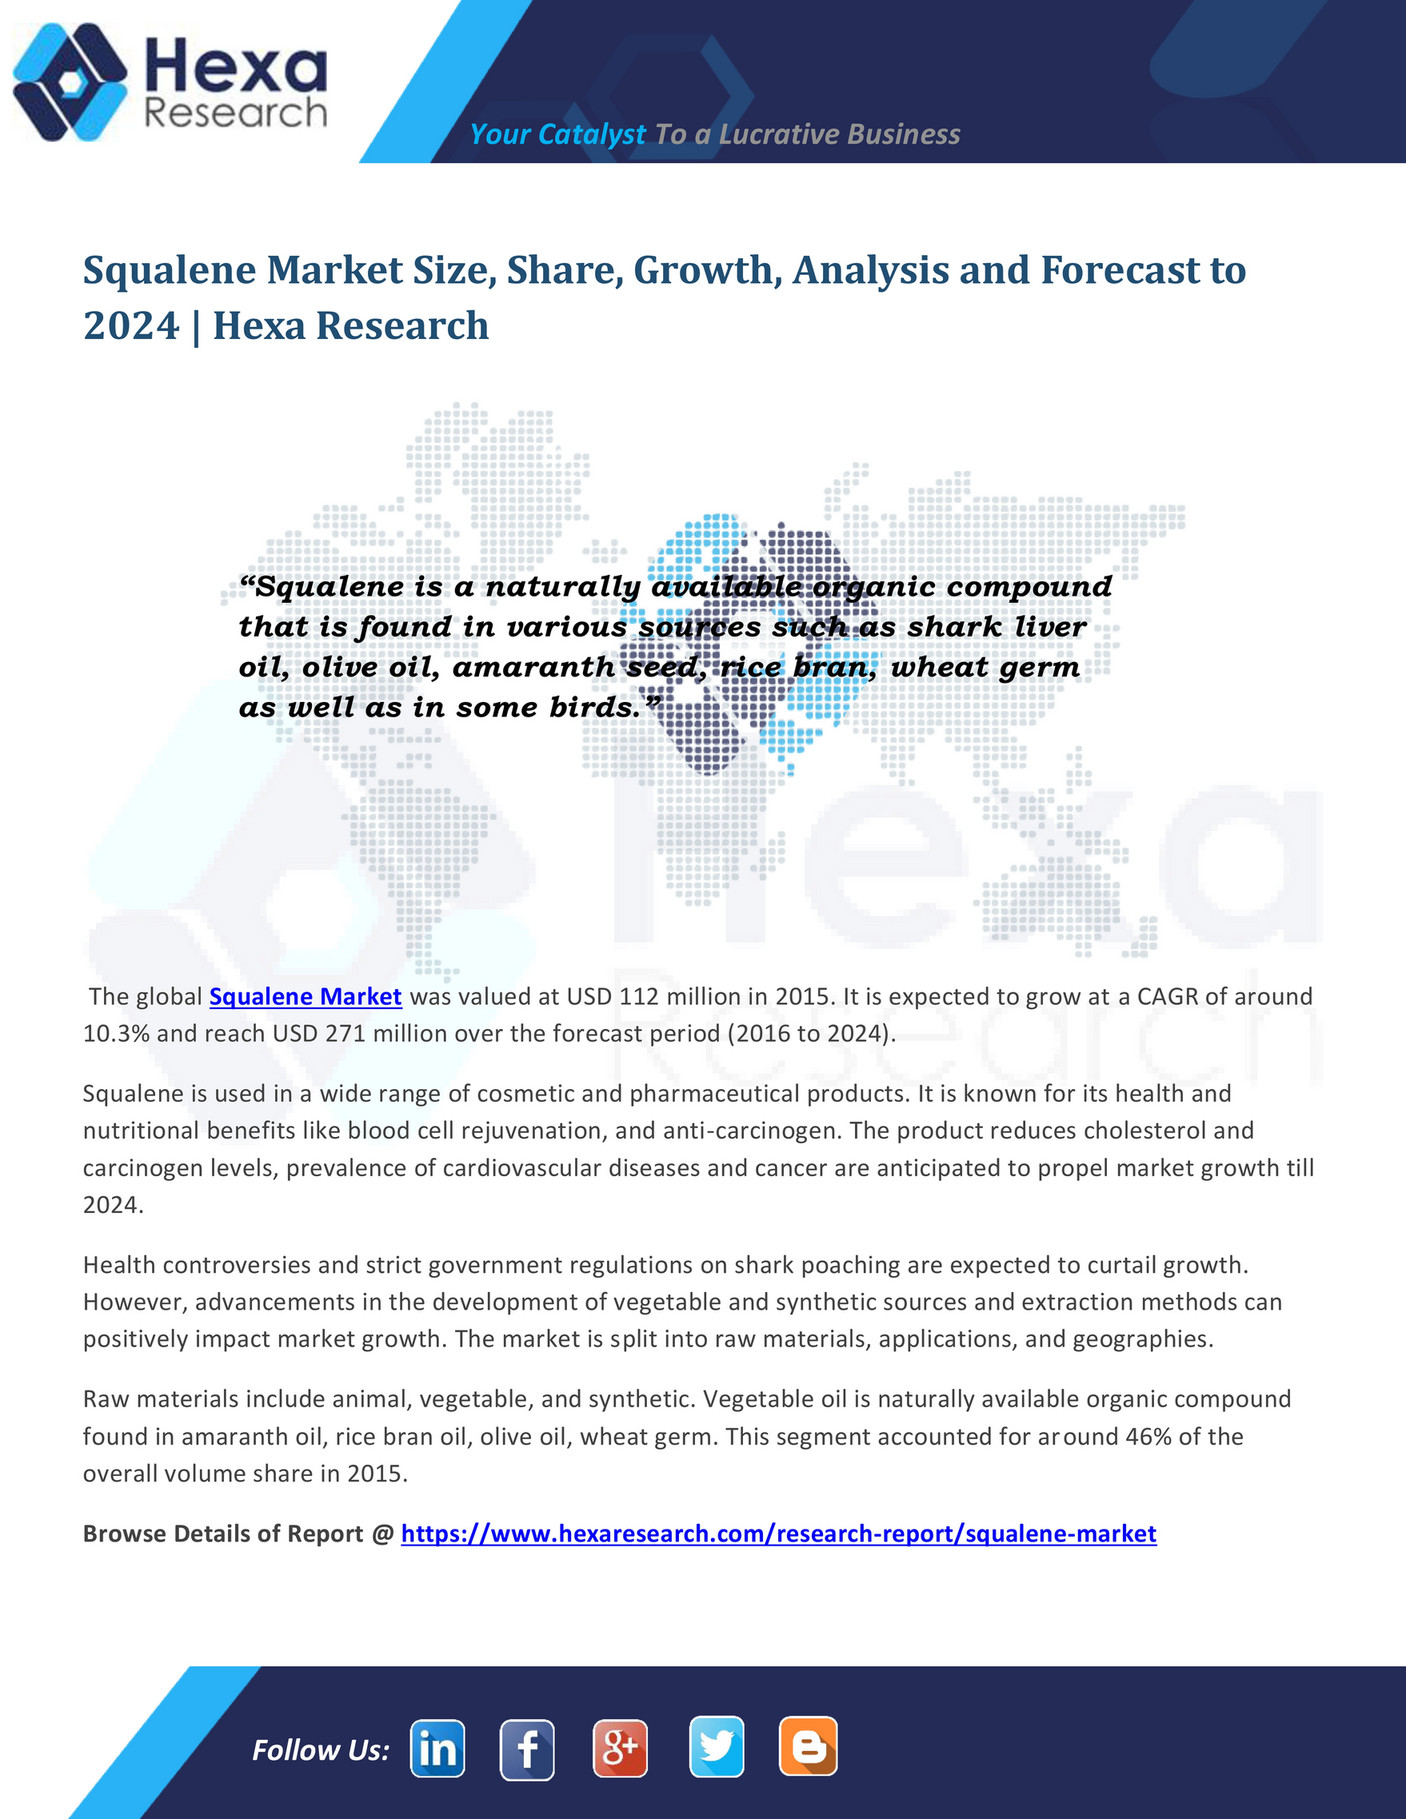 Grand View Research Squalene Market Will Reach USD 271 Million by